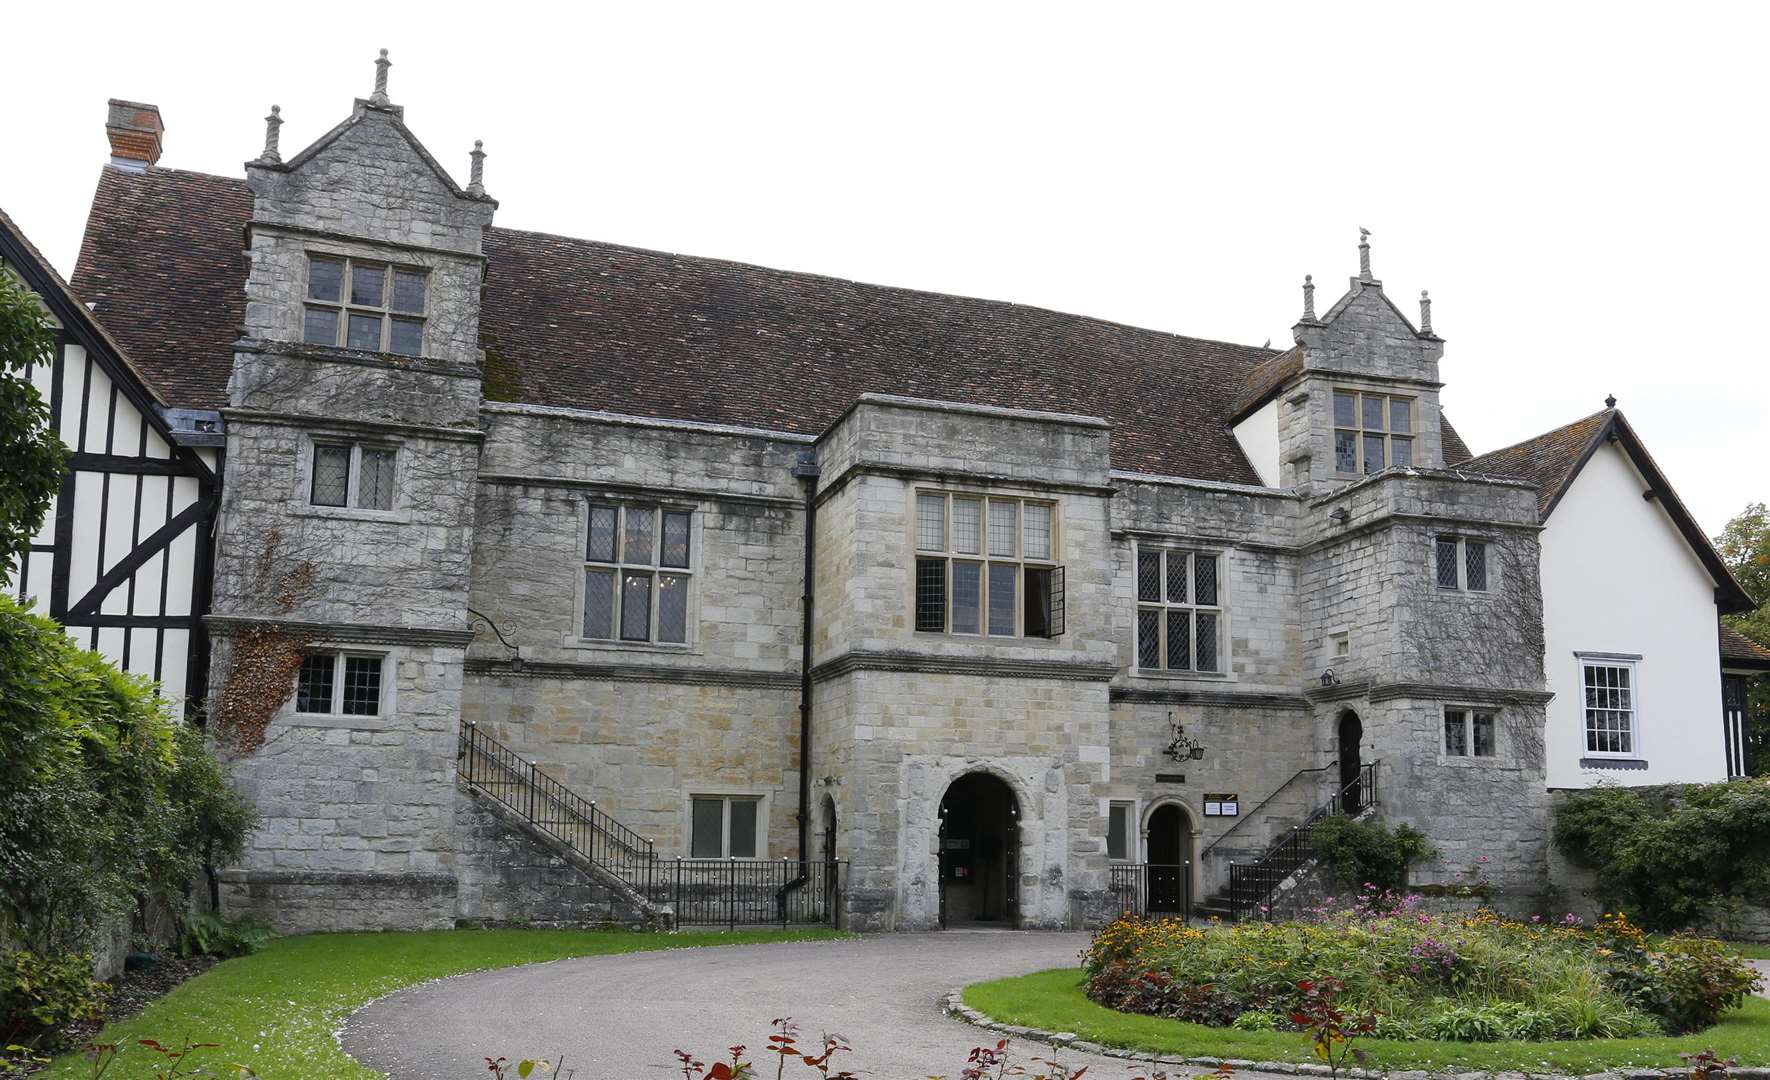 An inquest at Archbishop's Palace in Maidstone concluded James had committed suicide